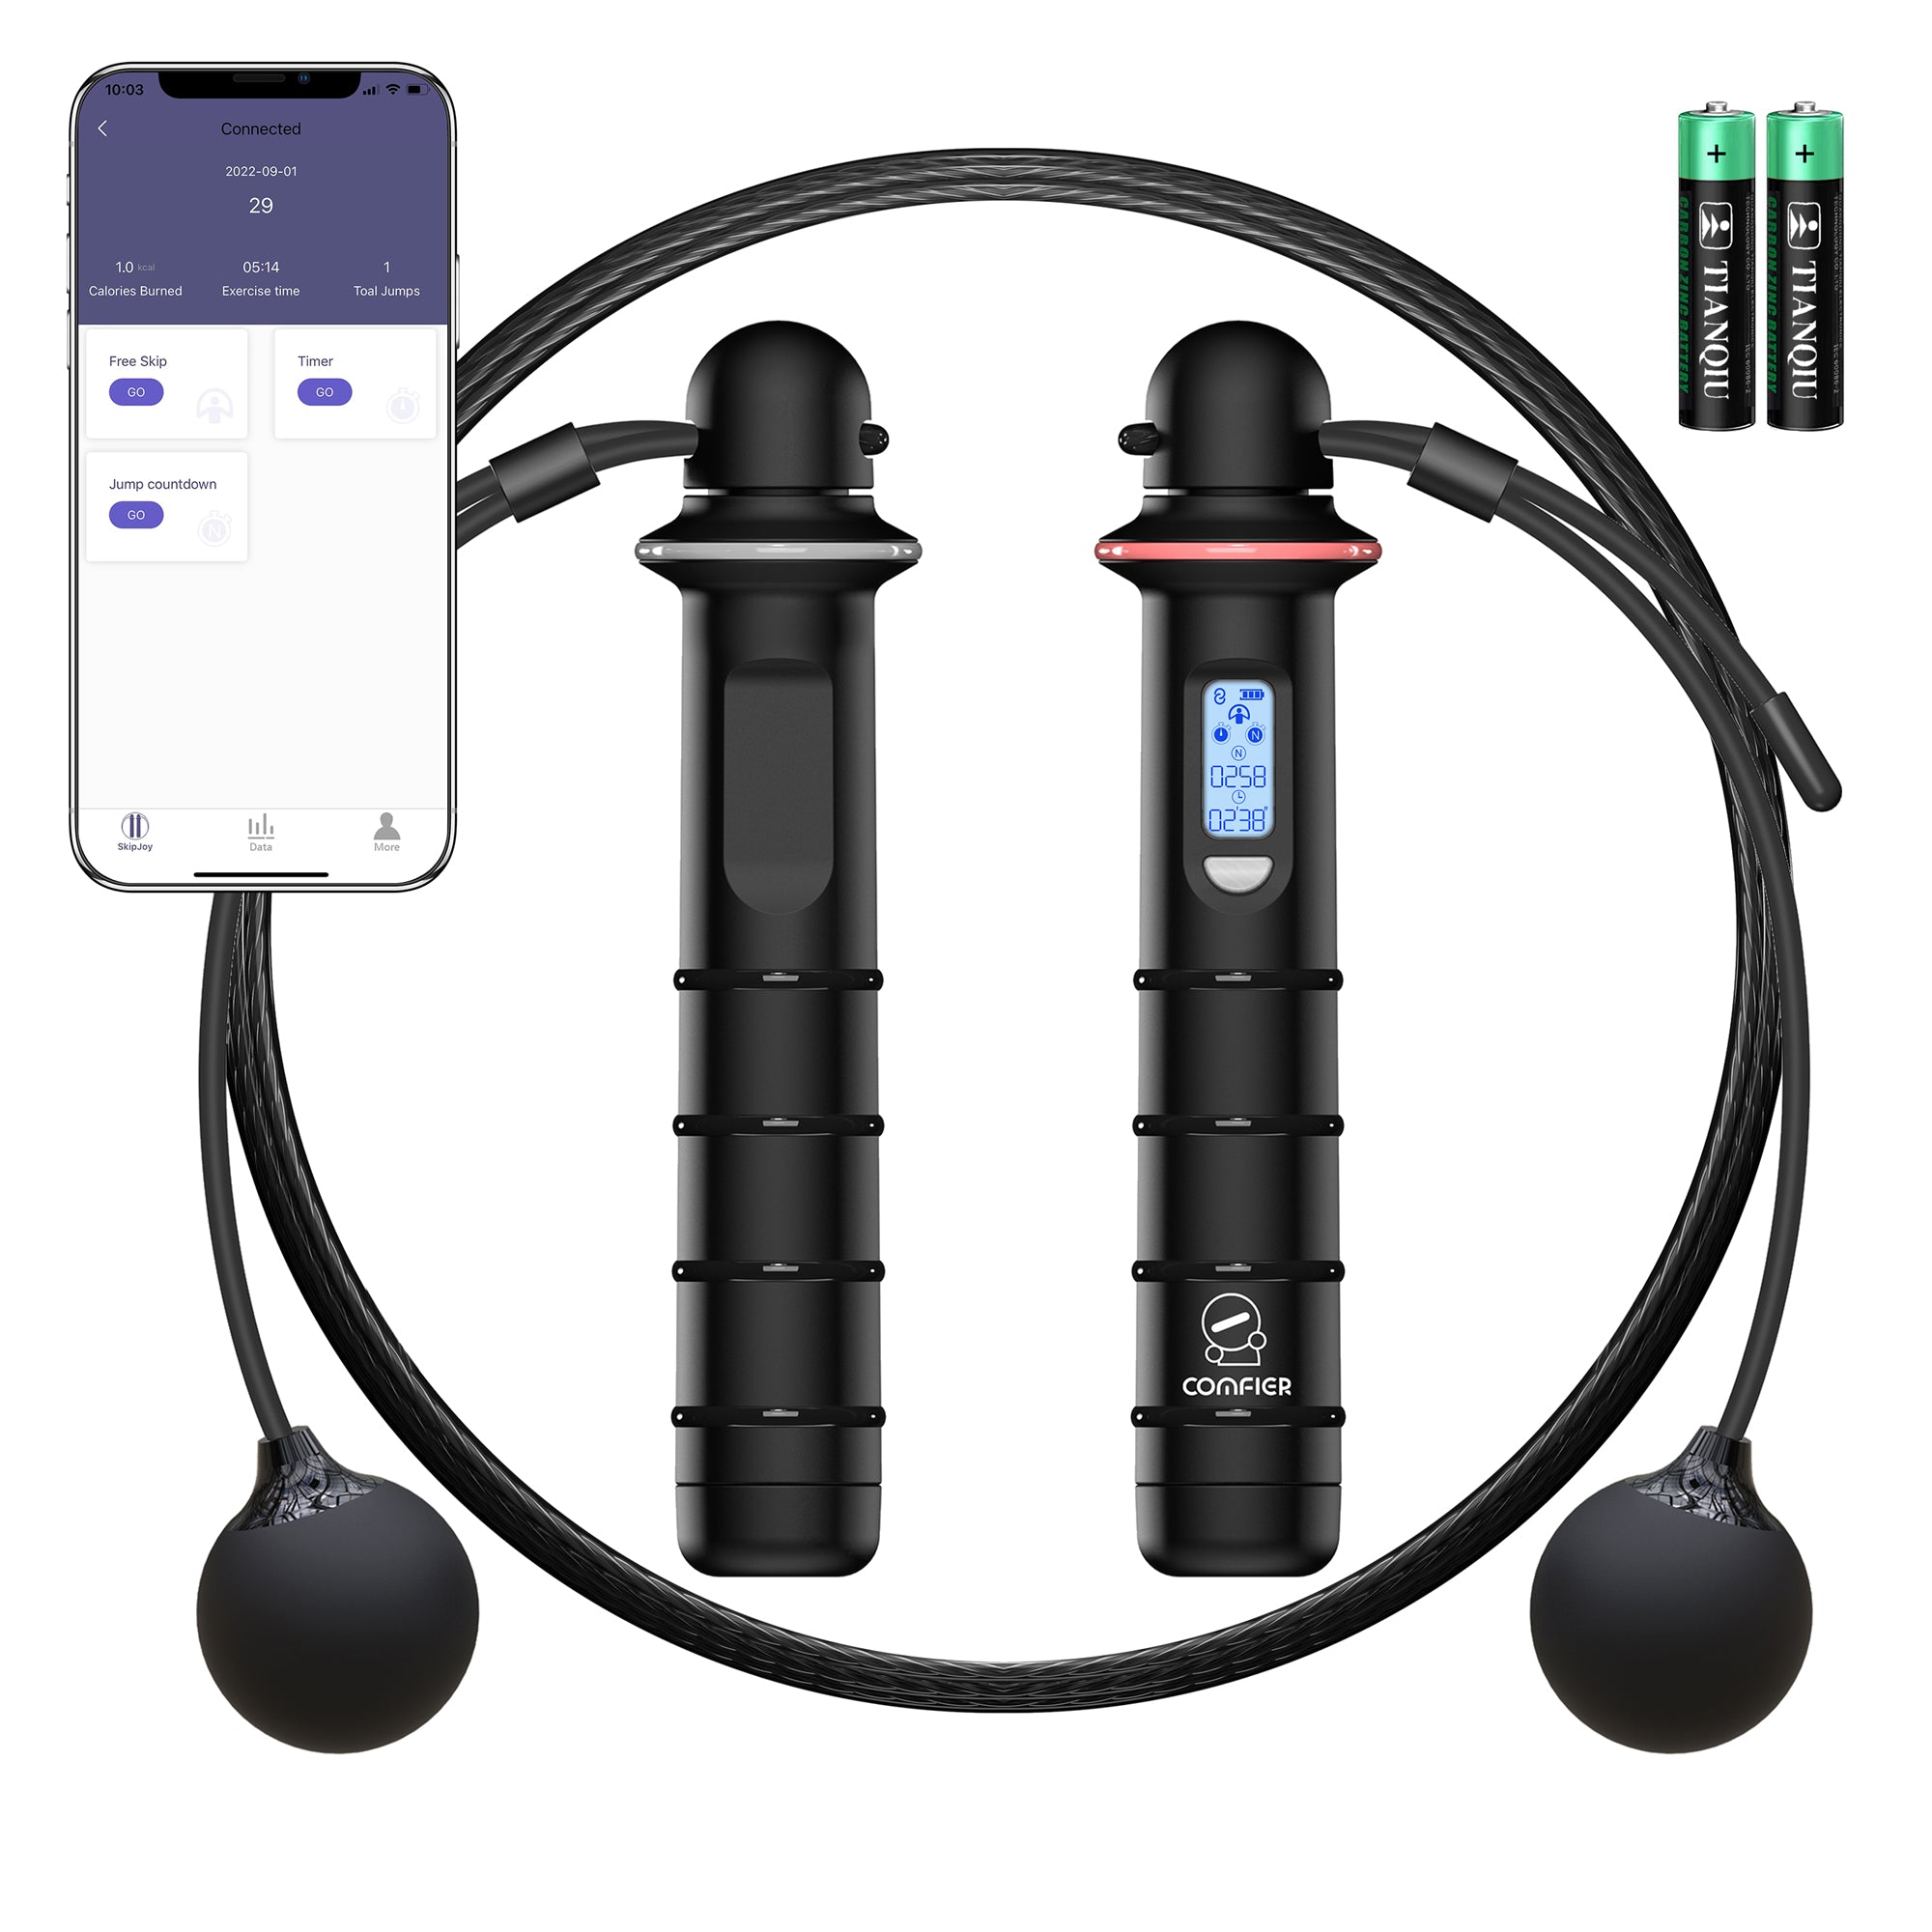 Comfier Smart Jump Rope for Fitness, Jumping Rope with APP Data Analys